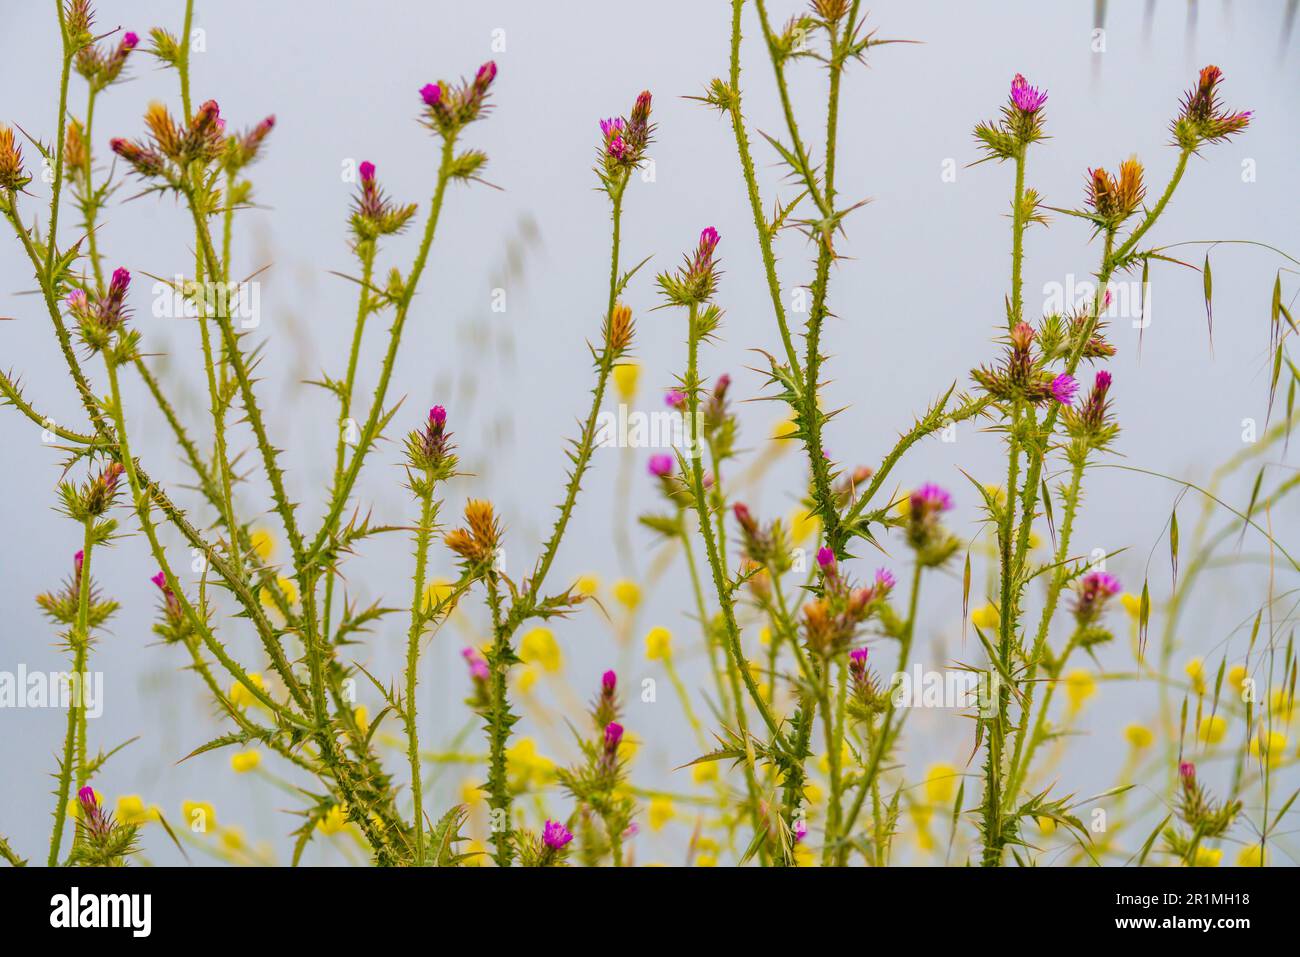 Italian thistle  (Carduus pycnocephalus) blooms on the beach on a gloomy foggy day. Beautiful pattern of wildflowers with foggy sky in the background Stock Photo